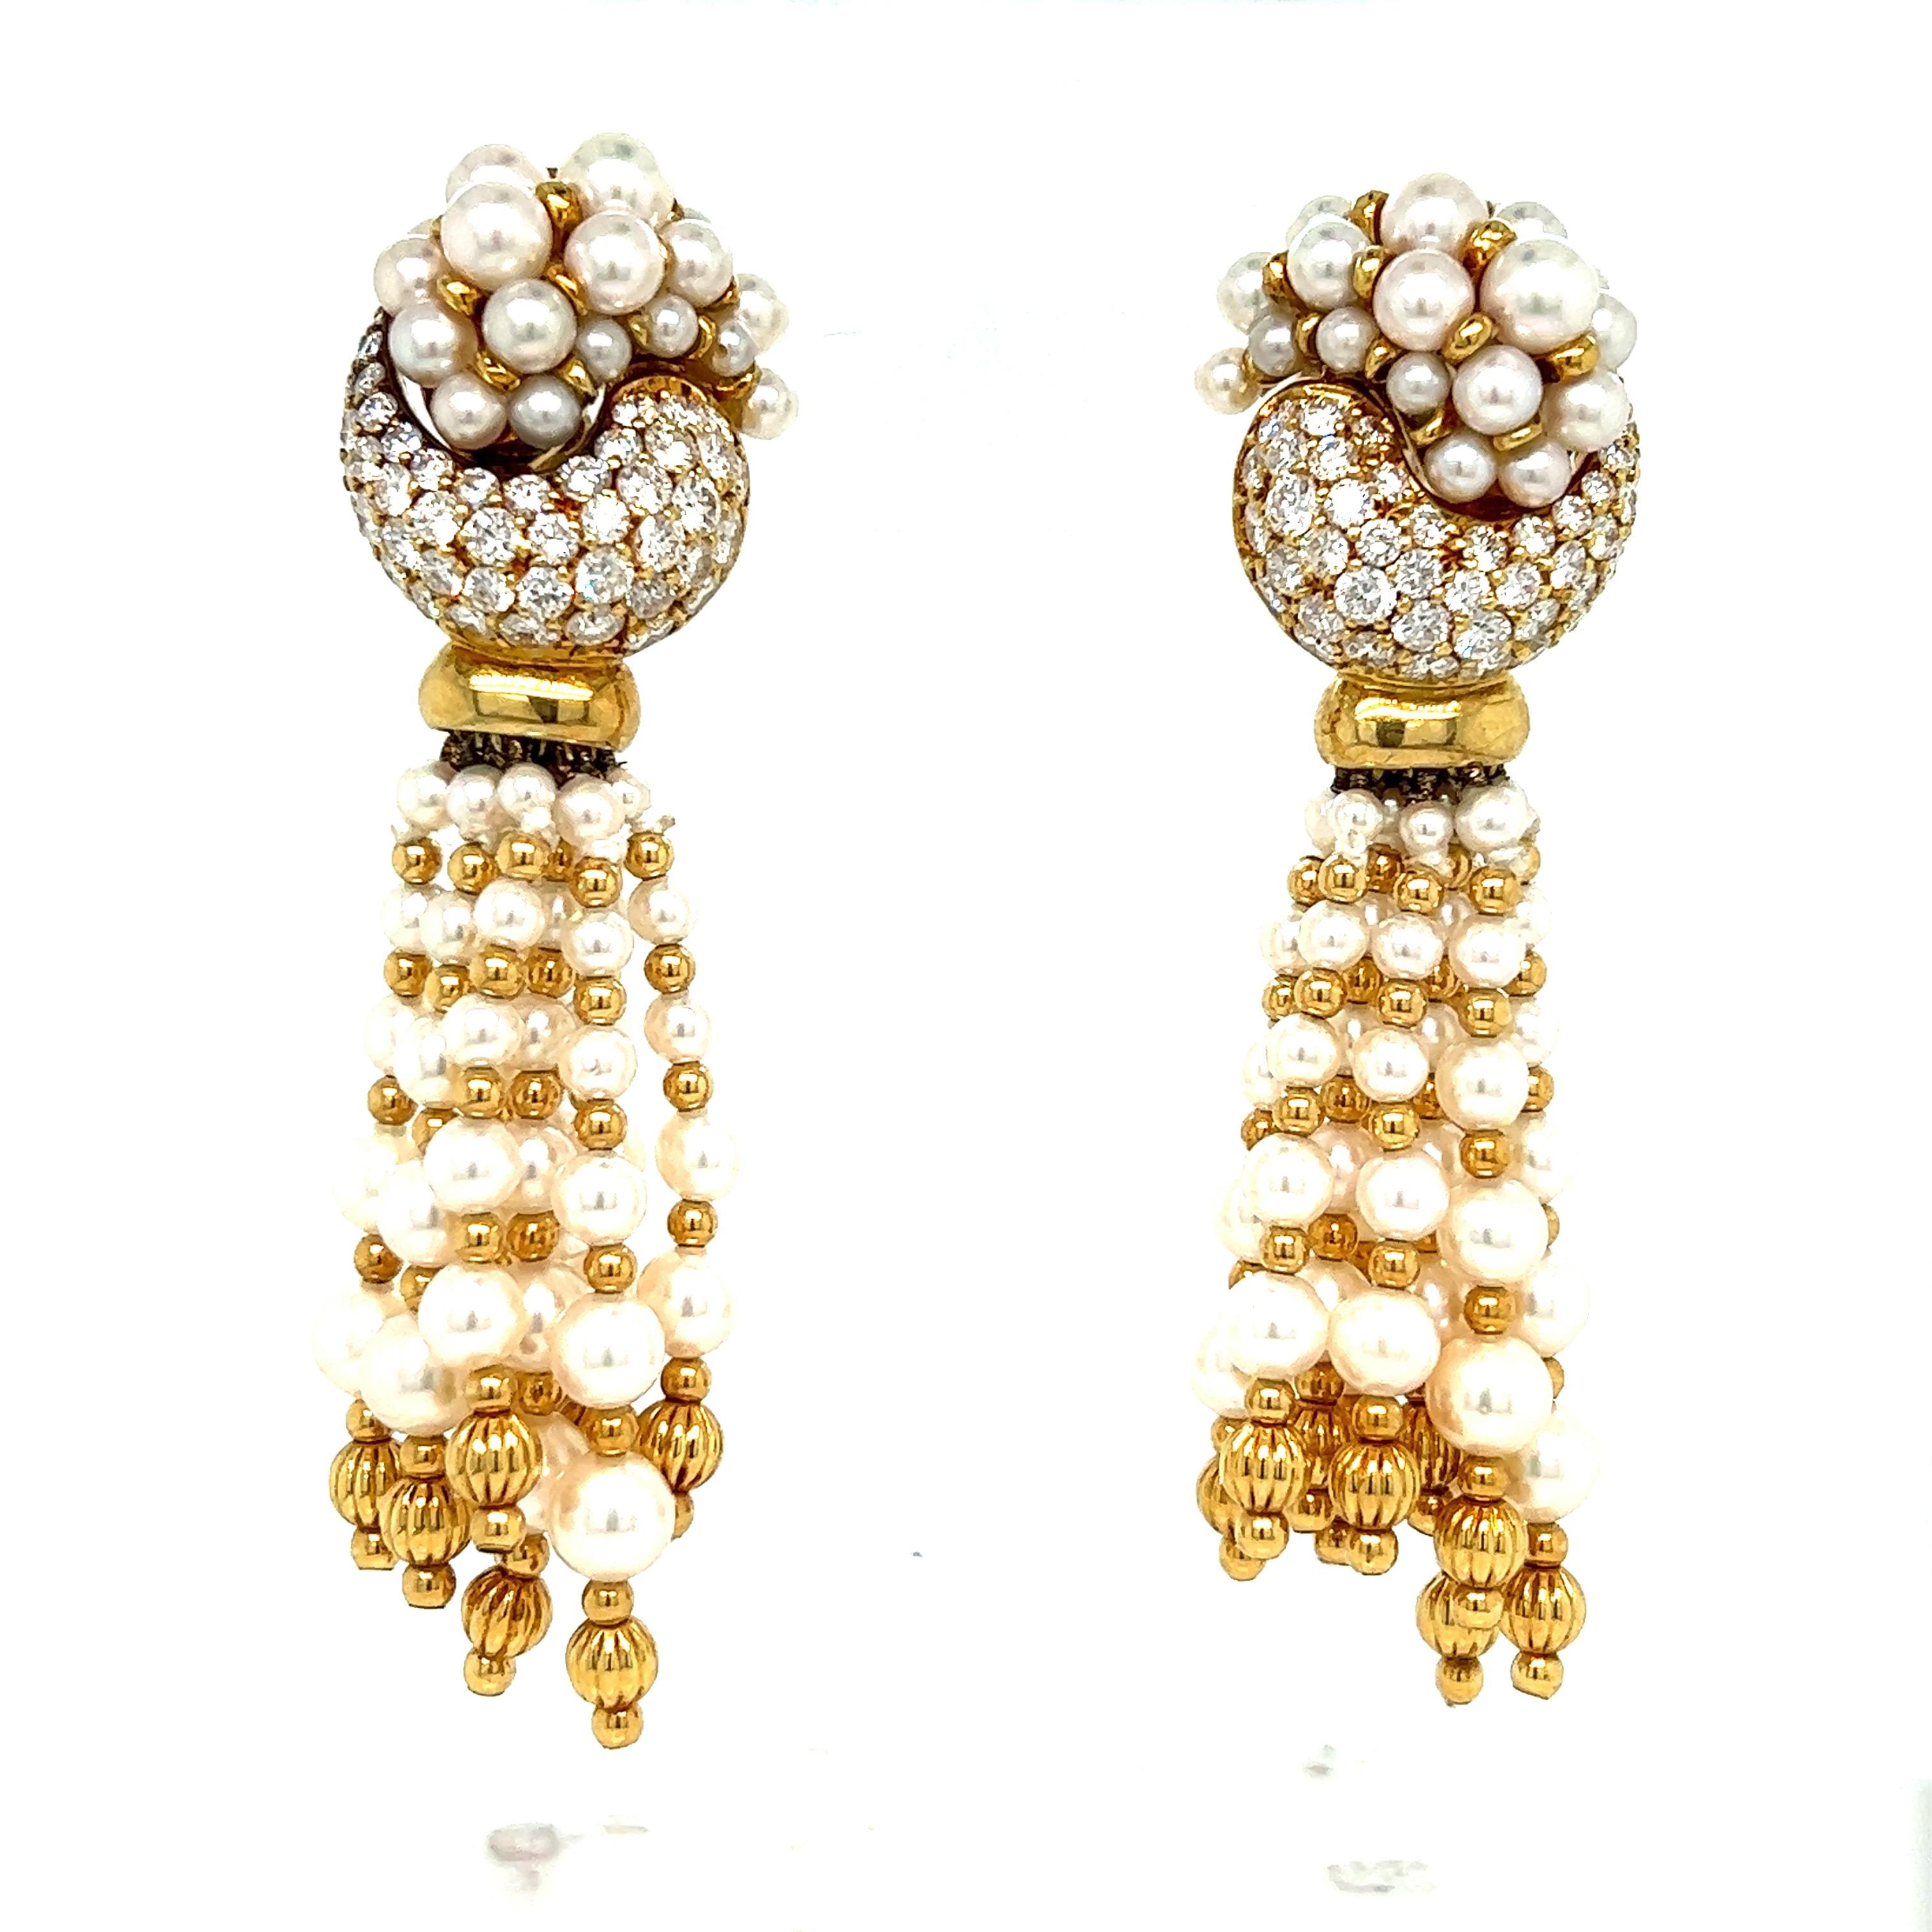 Gold pearl dangling earrings

Round brilliant-cut diamonds of approximately 4 carats, cultured pearls, French assay marks for 18 karat yellow gold; marked 750

Size: width 0.75 inch, length 2.63 inches
Total weight: 39.4 grams 